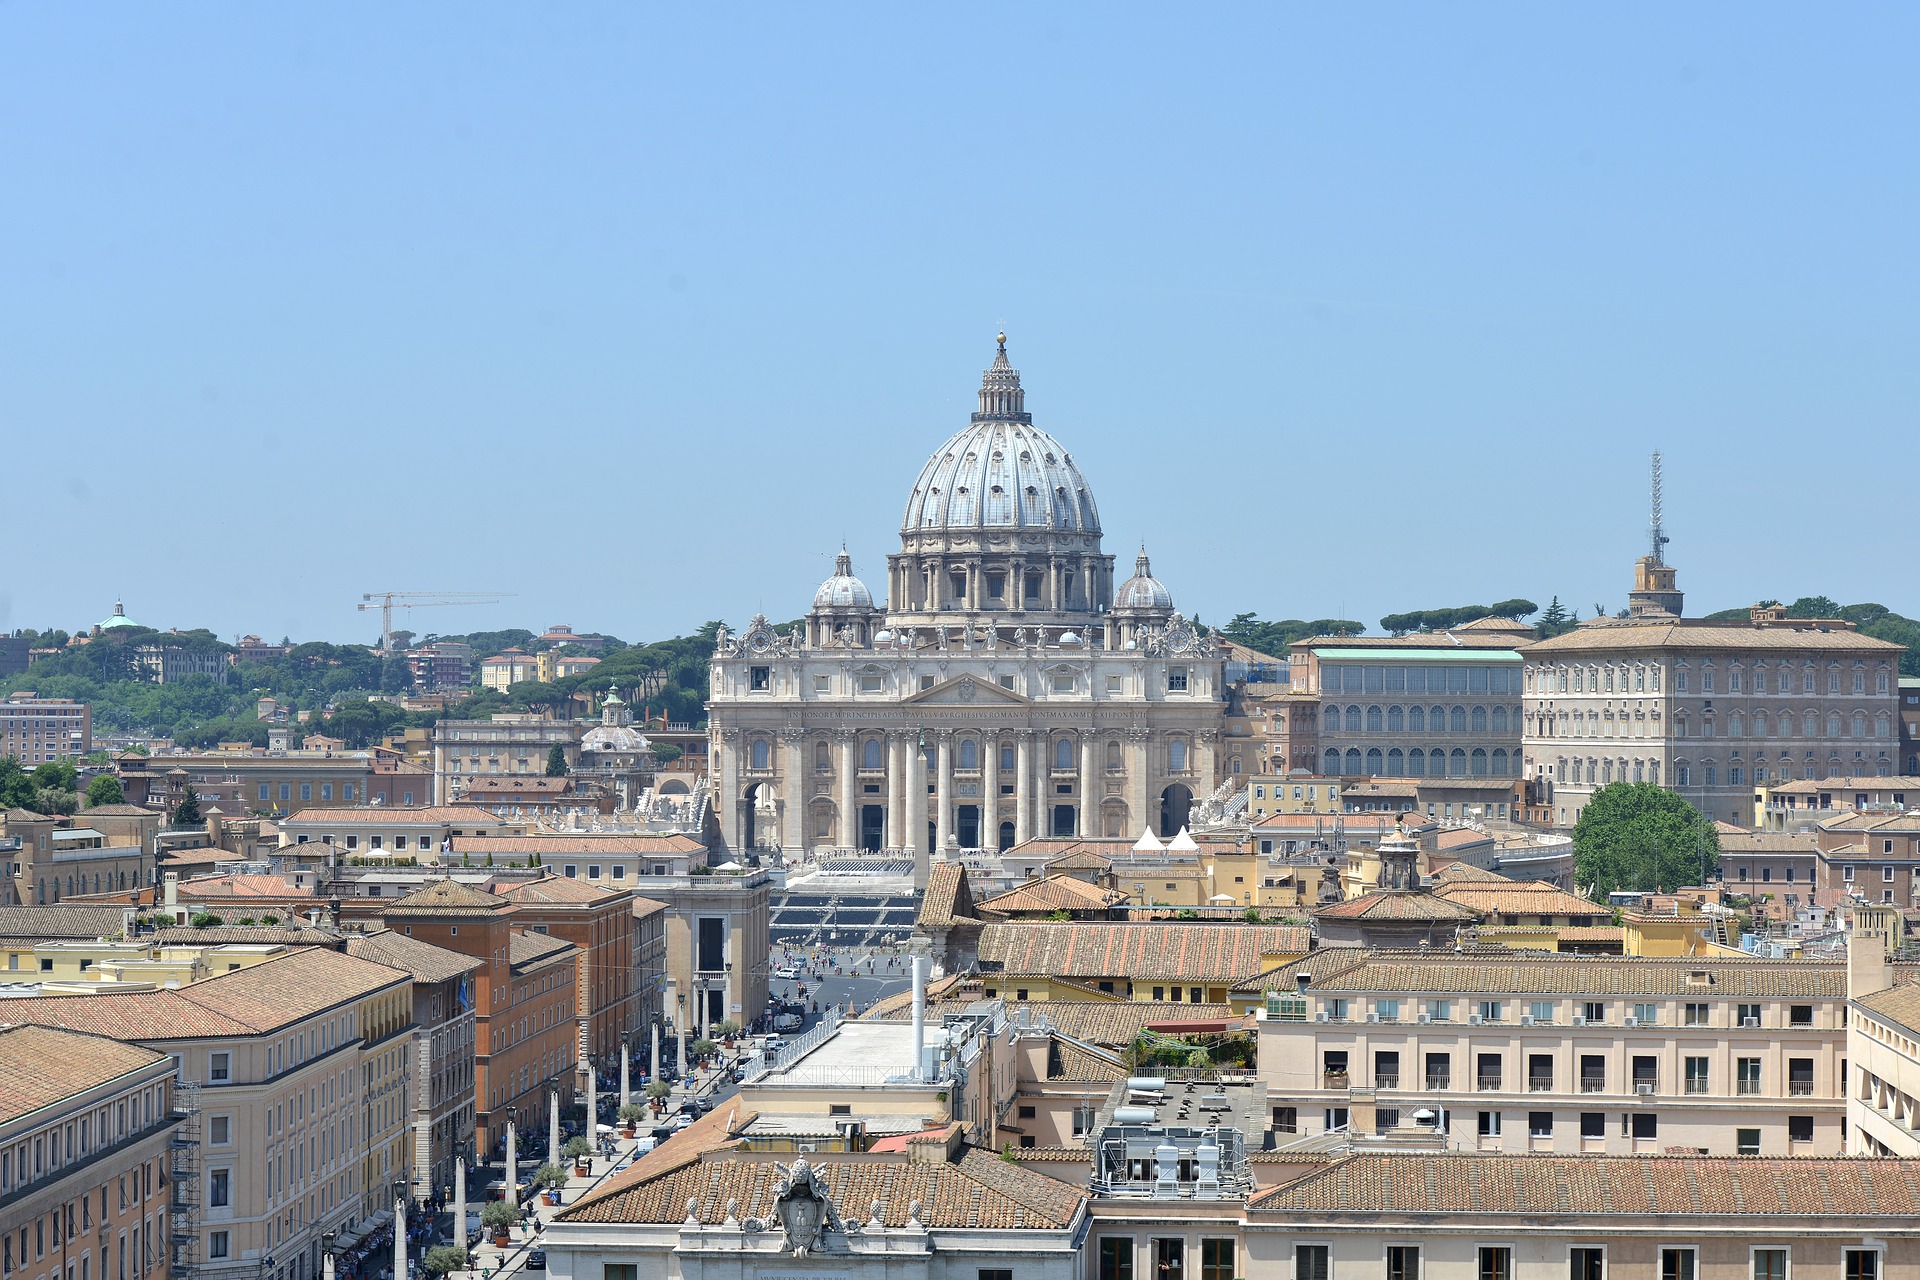 Most beautiful Cathedrals - St. Peters